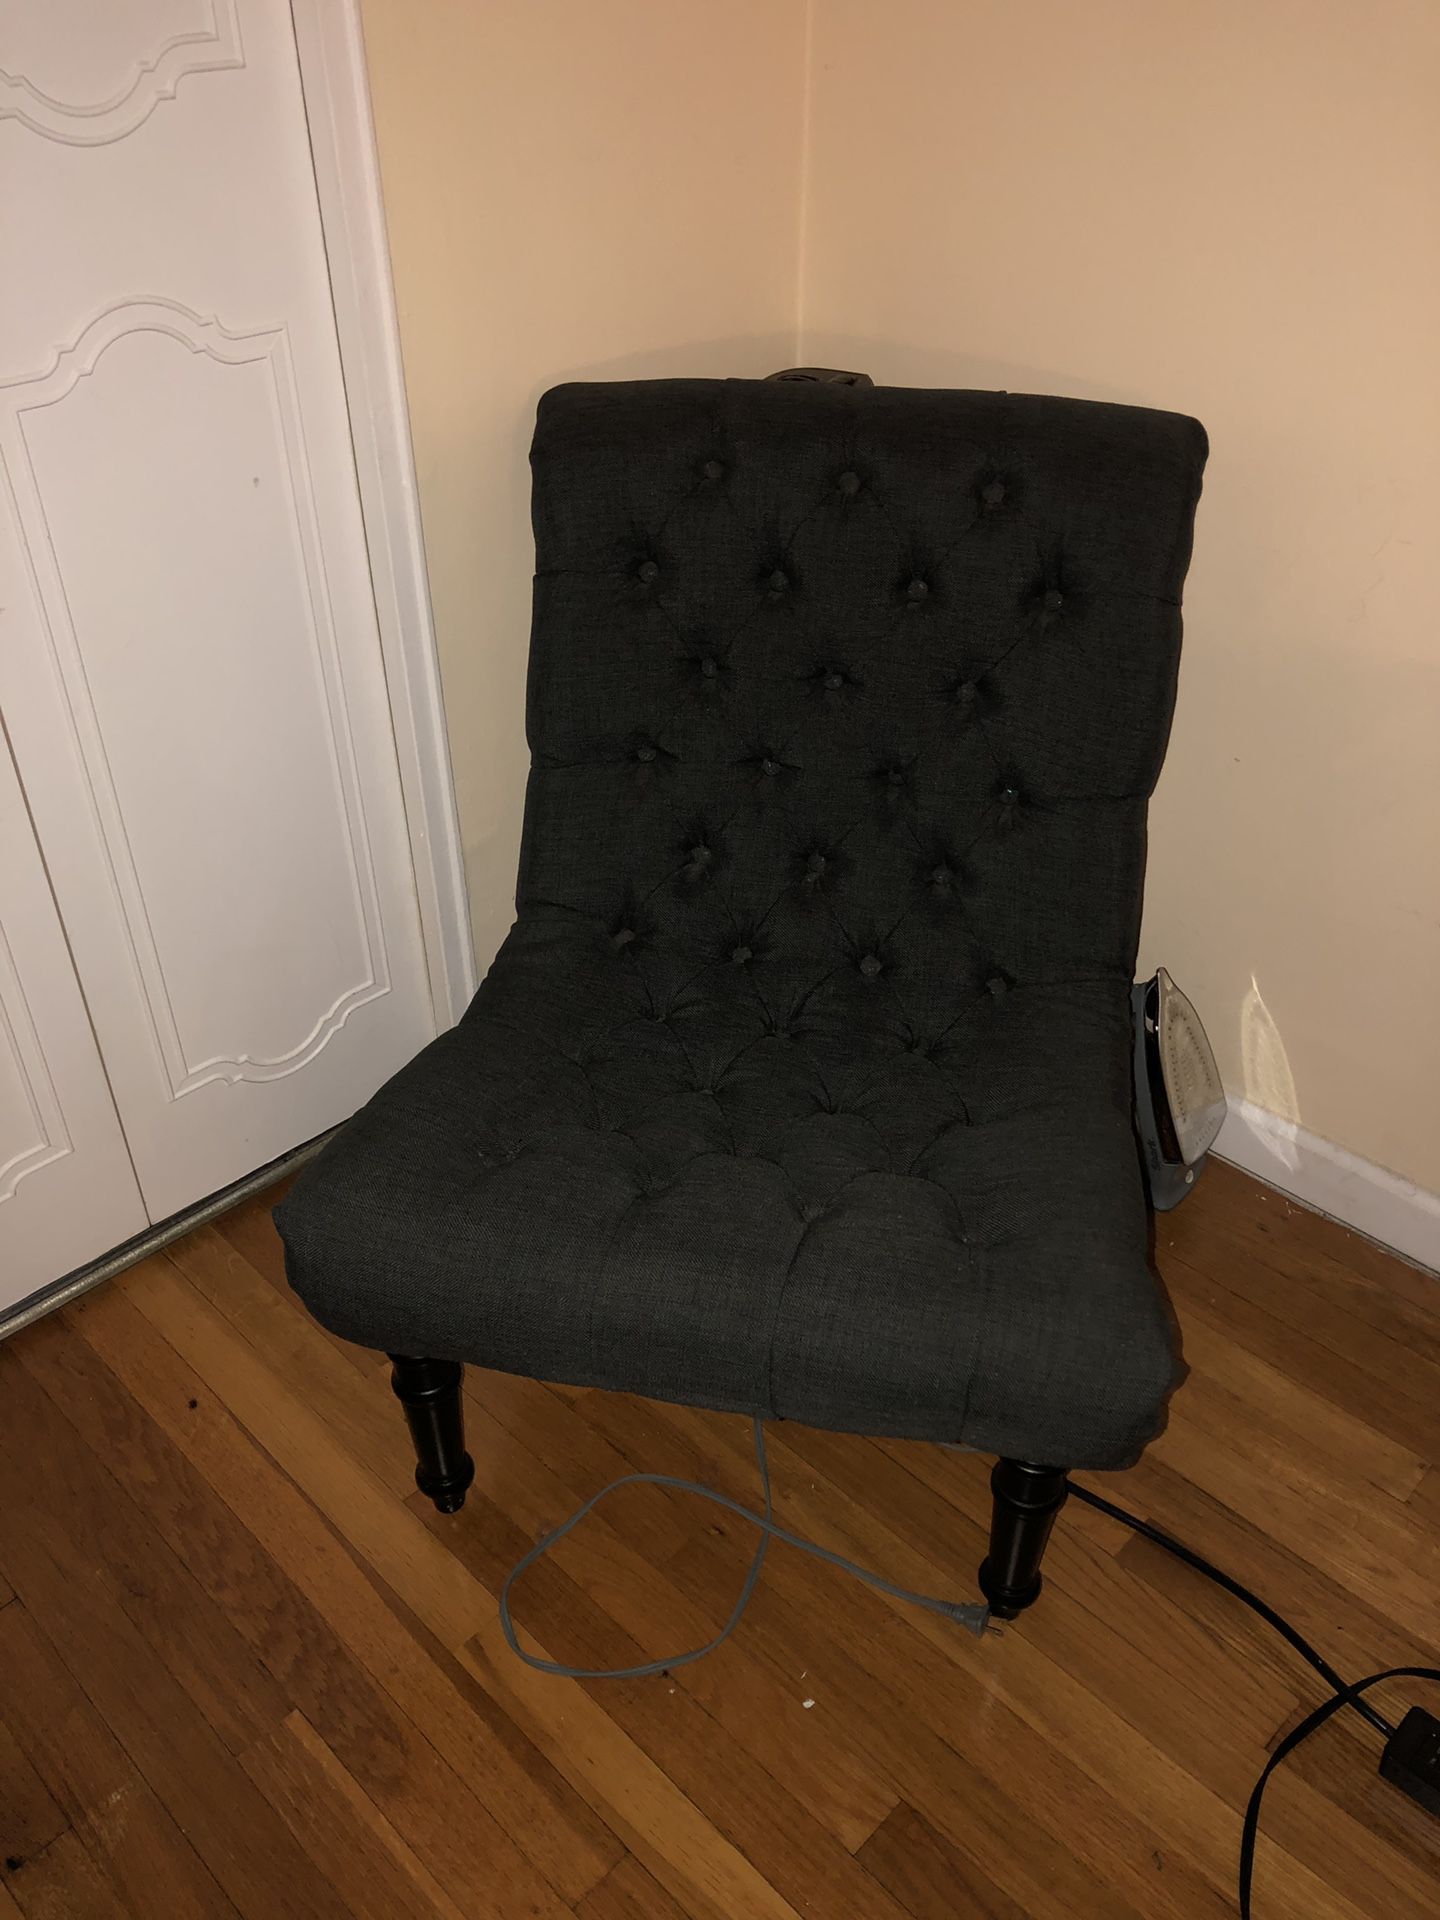 Upholstery chair and ottoman